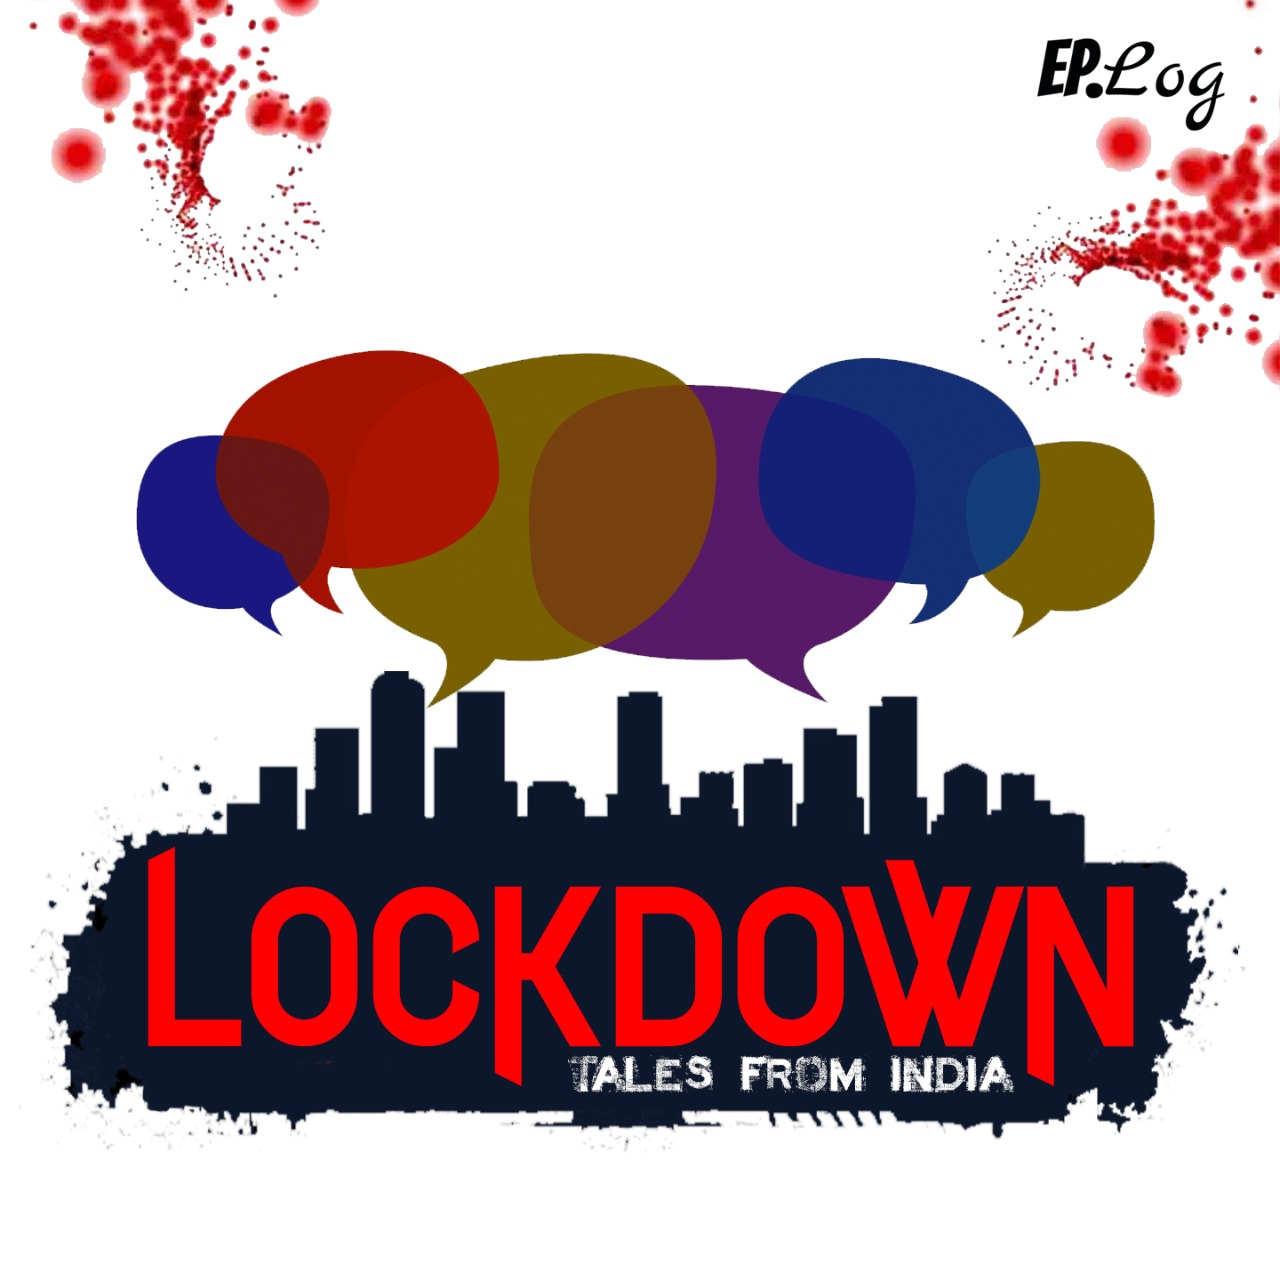 LOCKDOWN Tales From India